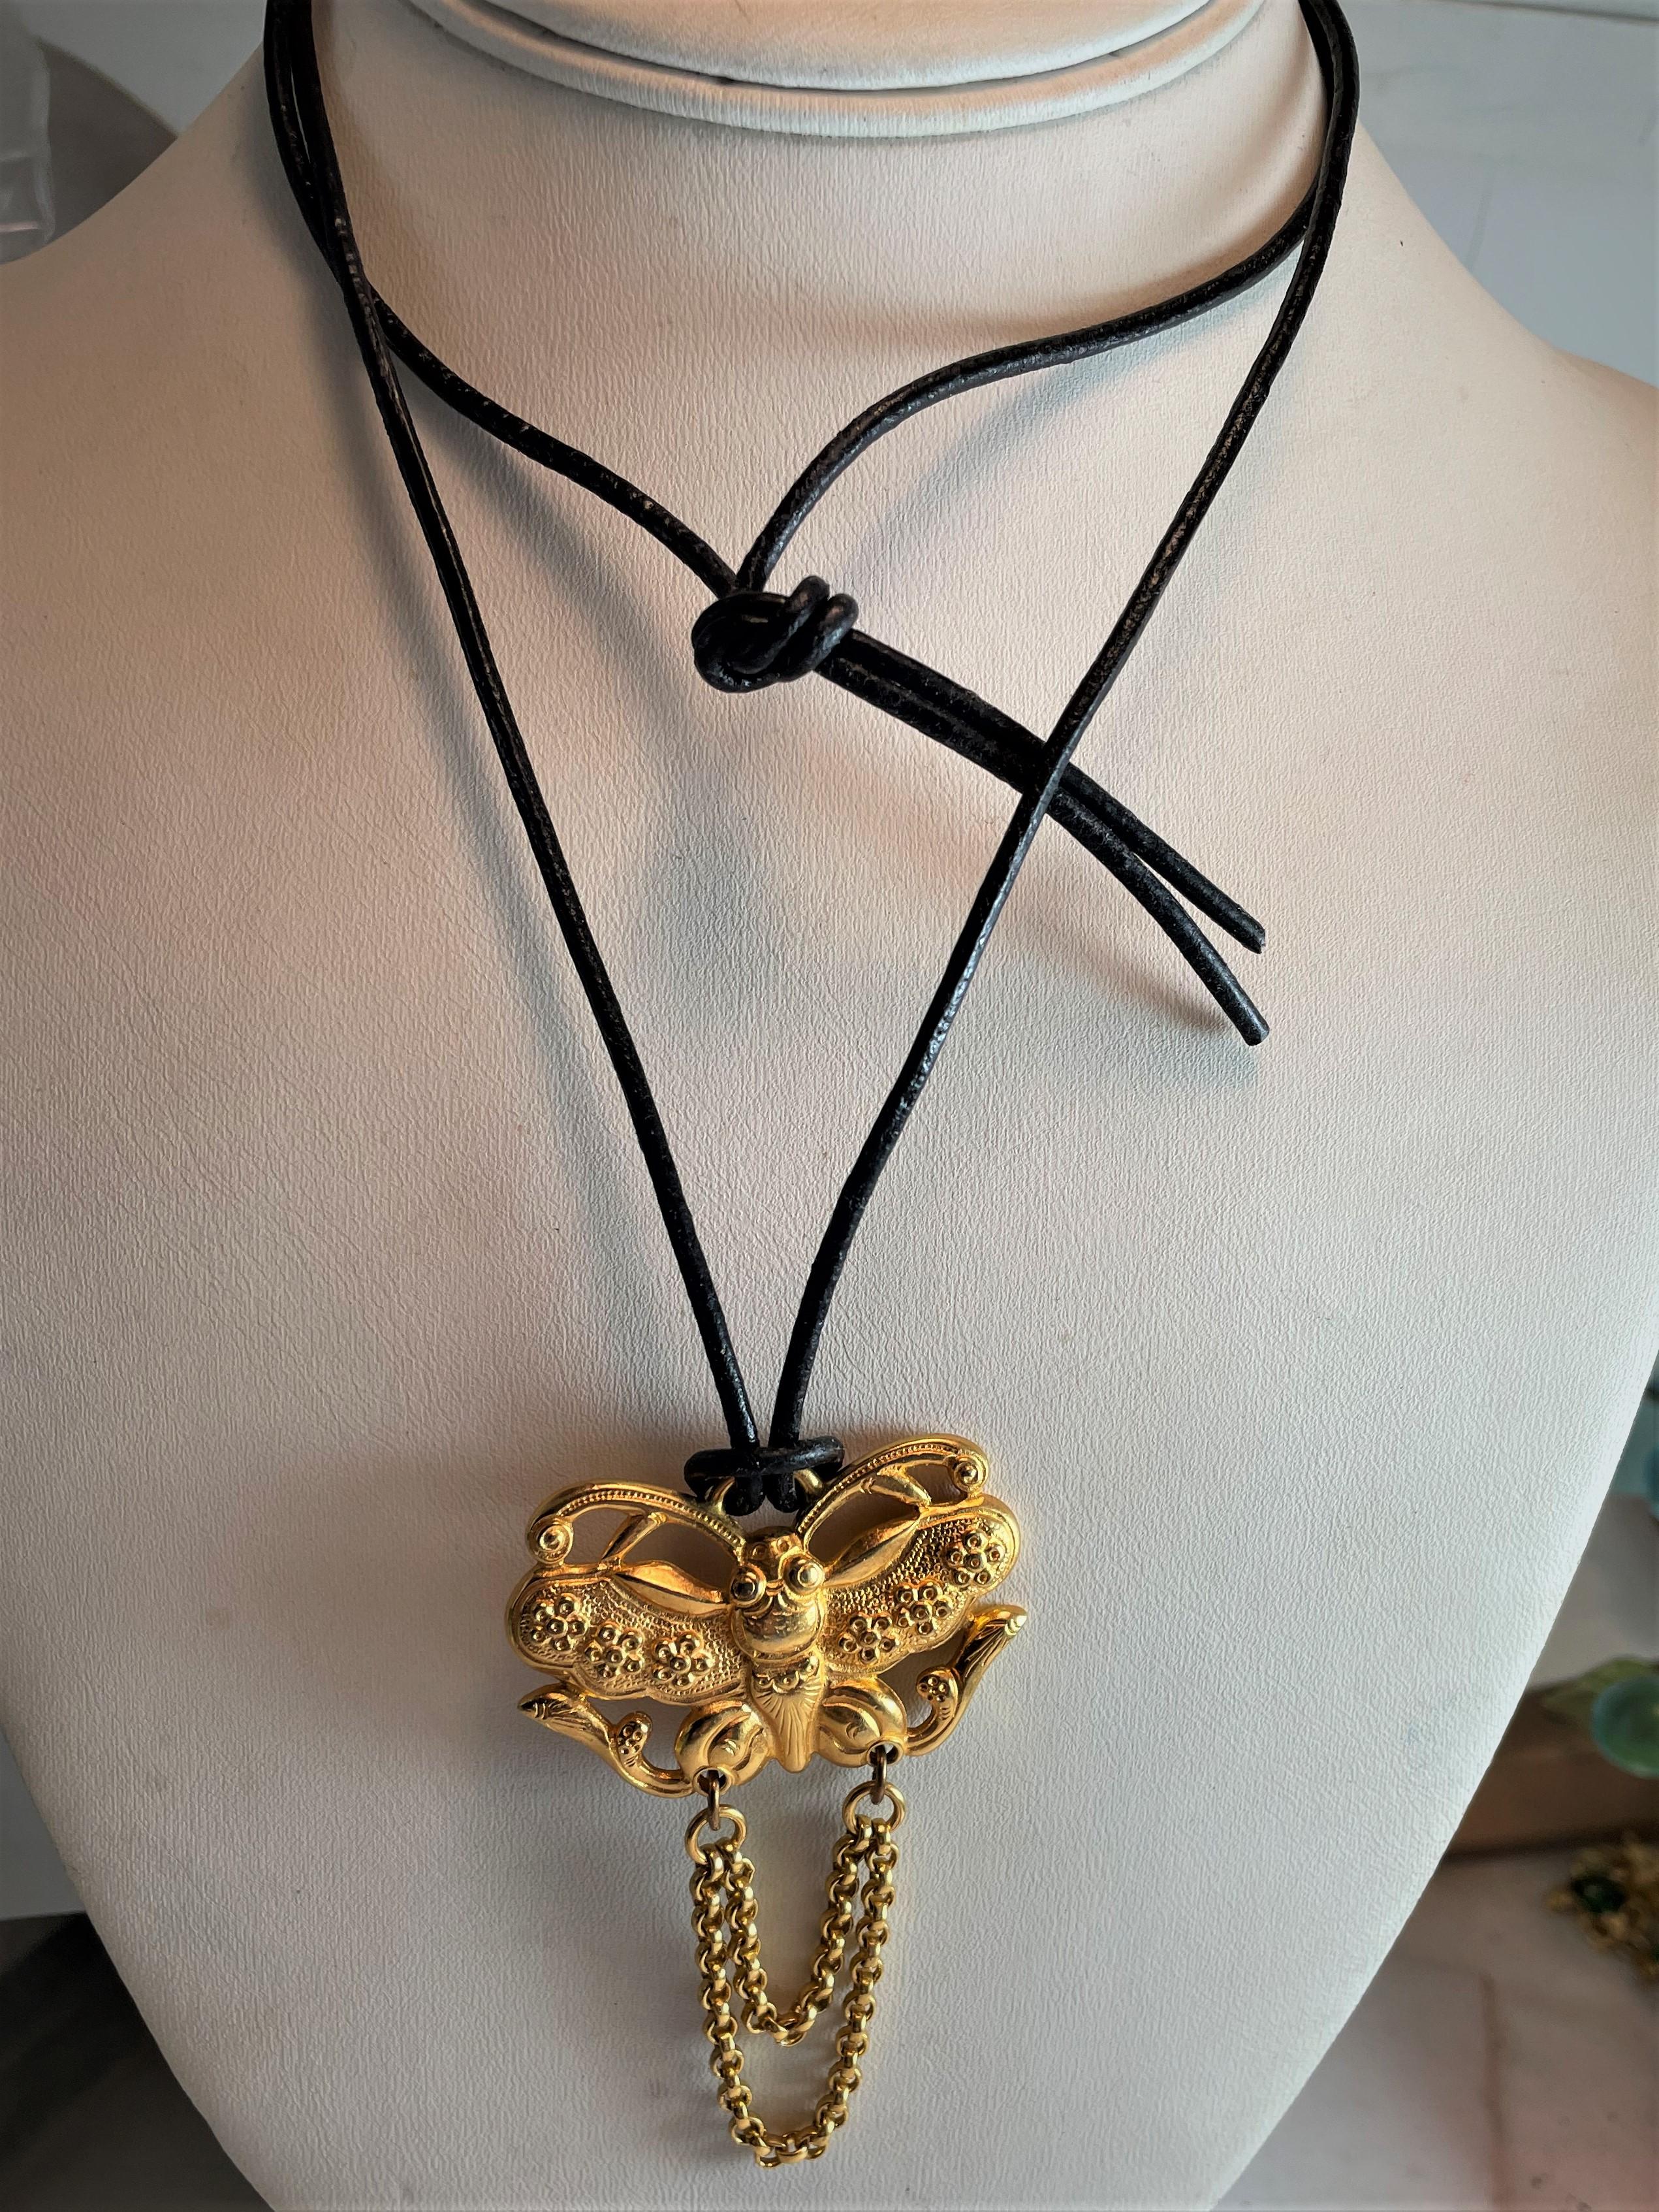 American Ben-Amun Stylized Butterfly Gold Tone Pendant on Leather Cord For Sale